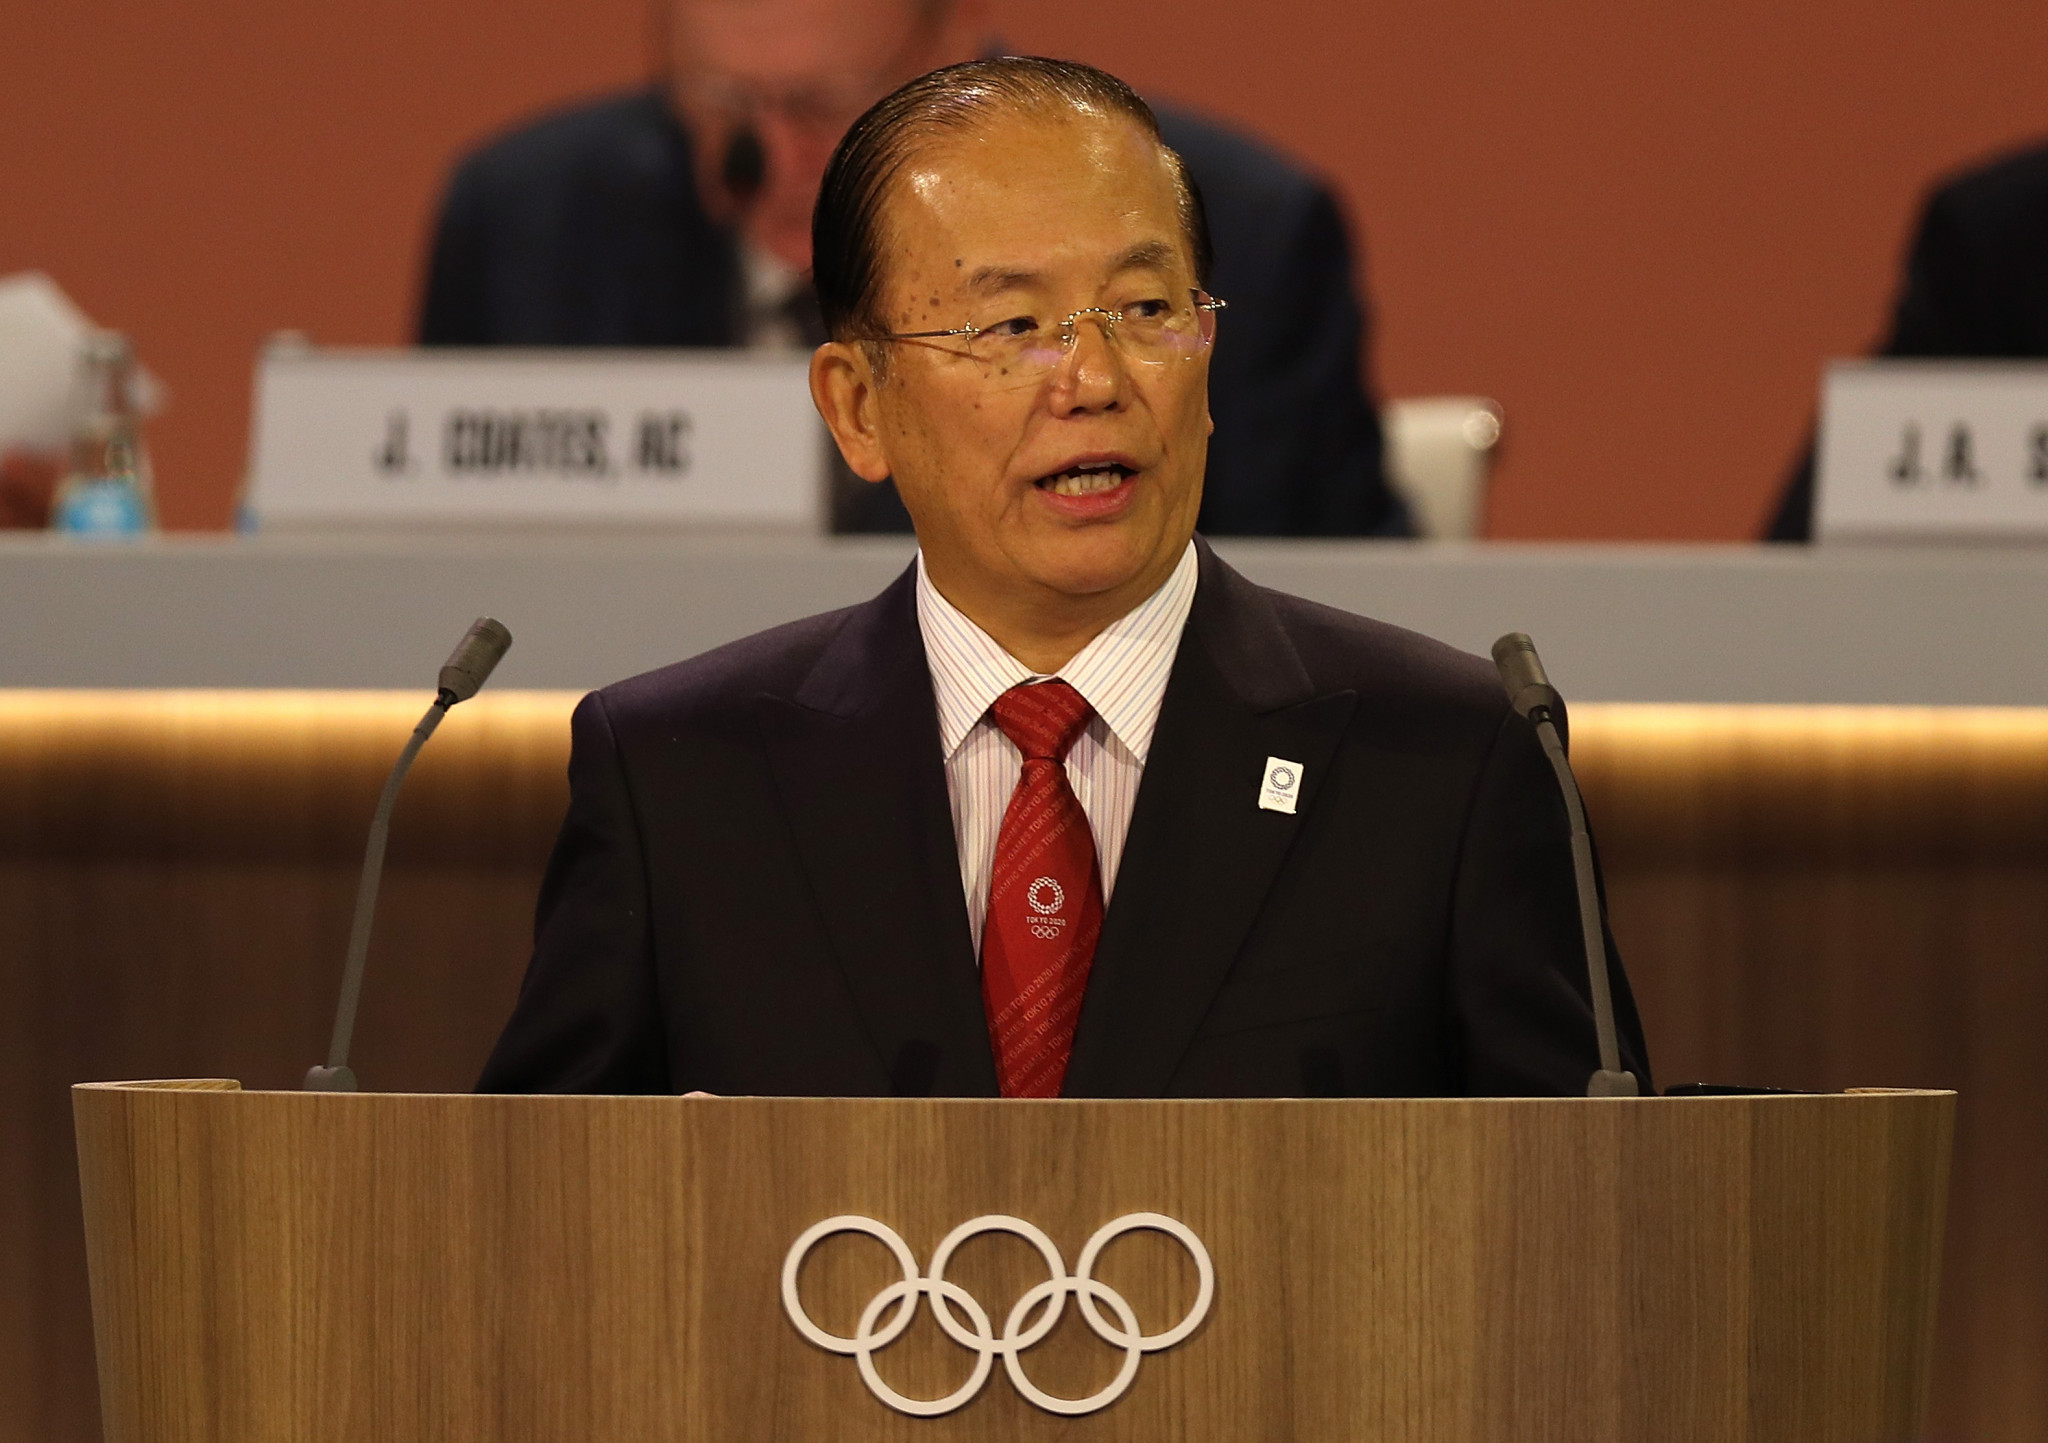 Tokyo 2020 chief executive Mutō dismisses report on Olympic costs